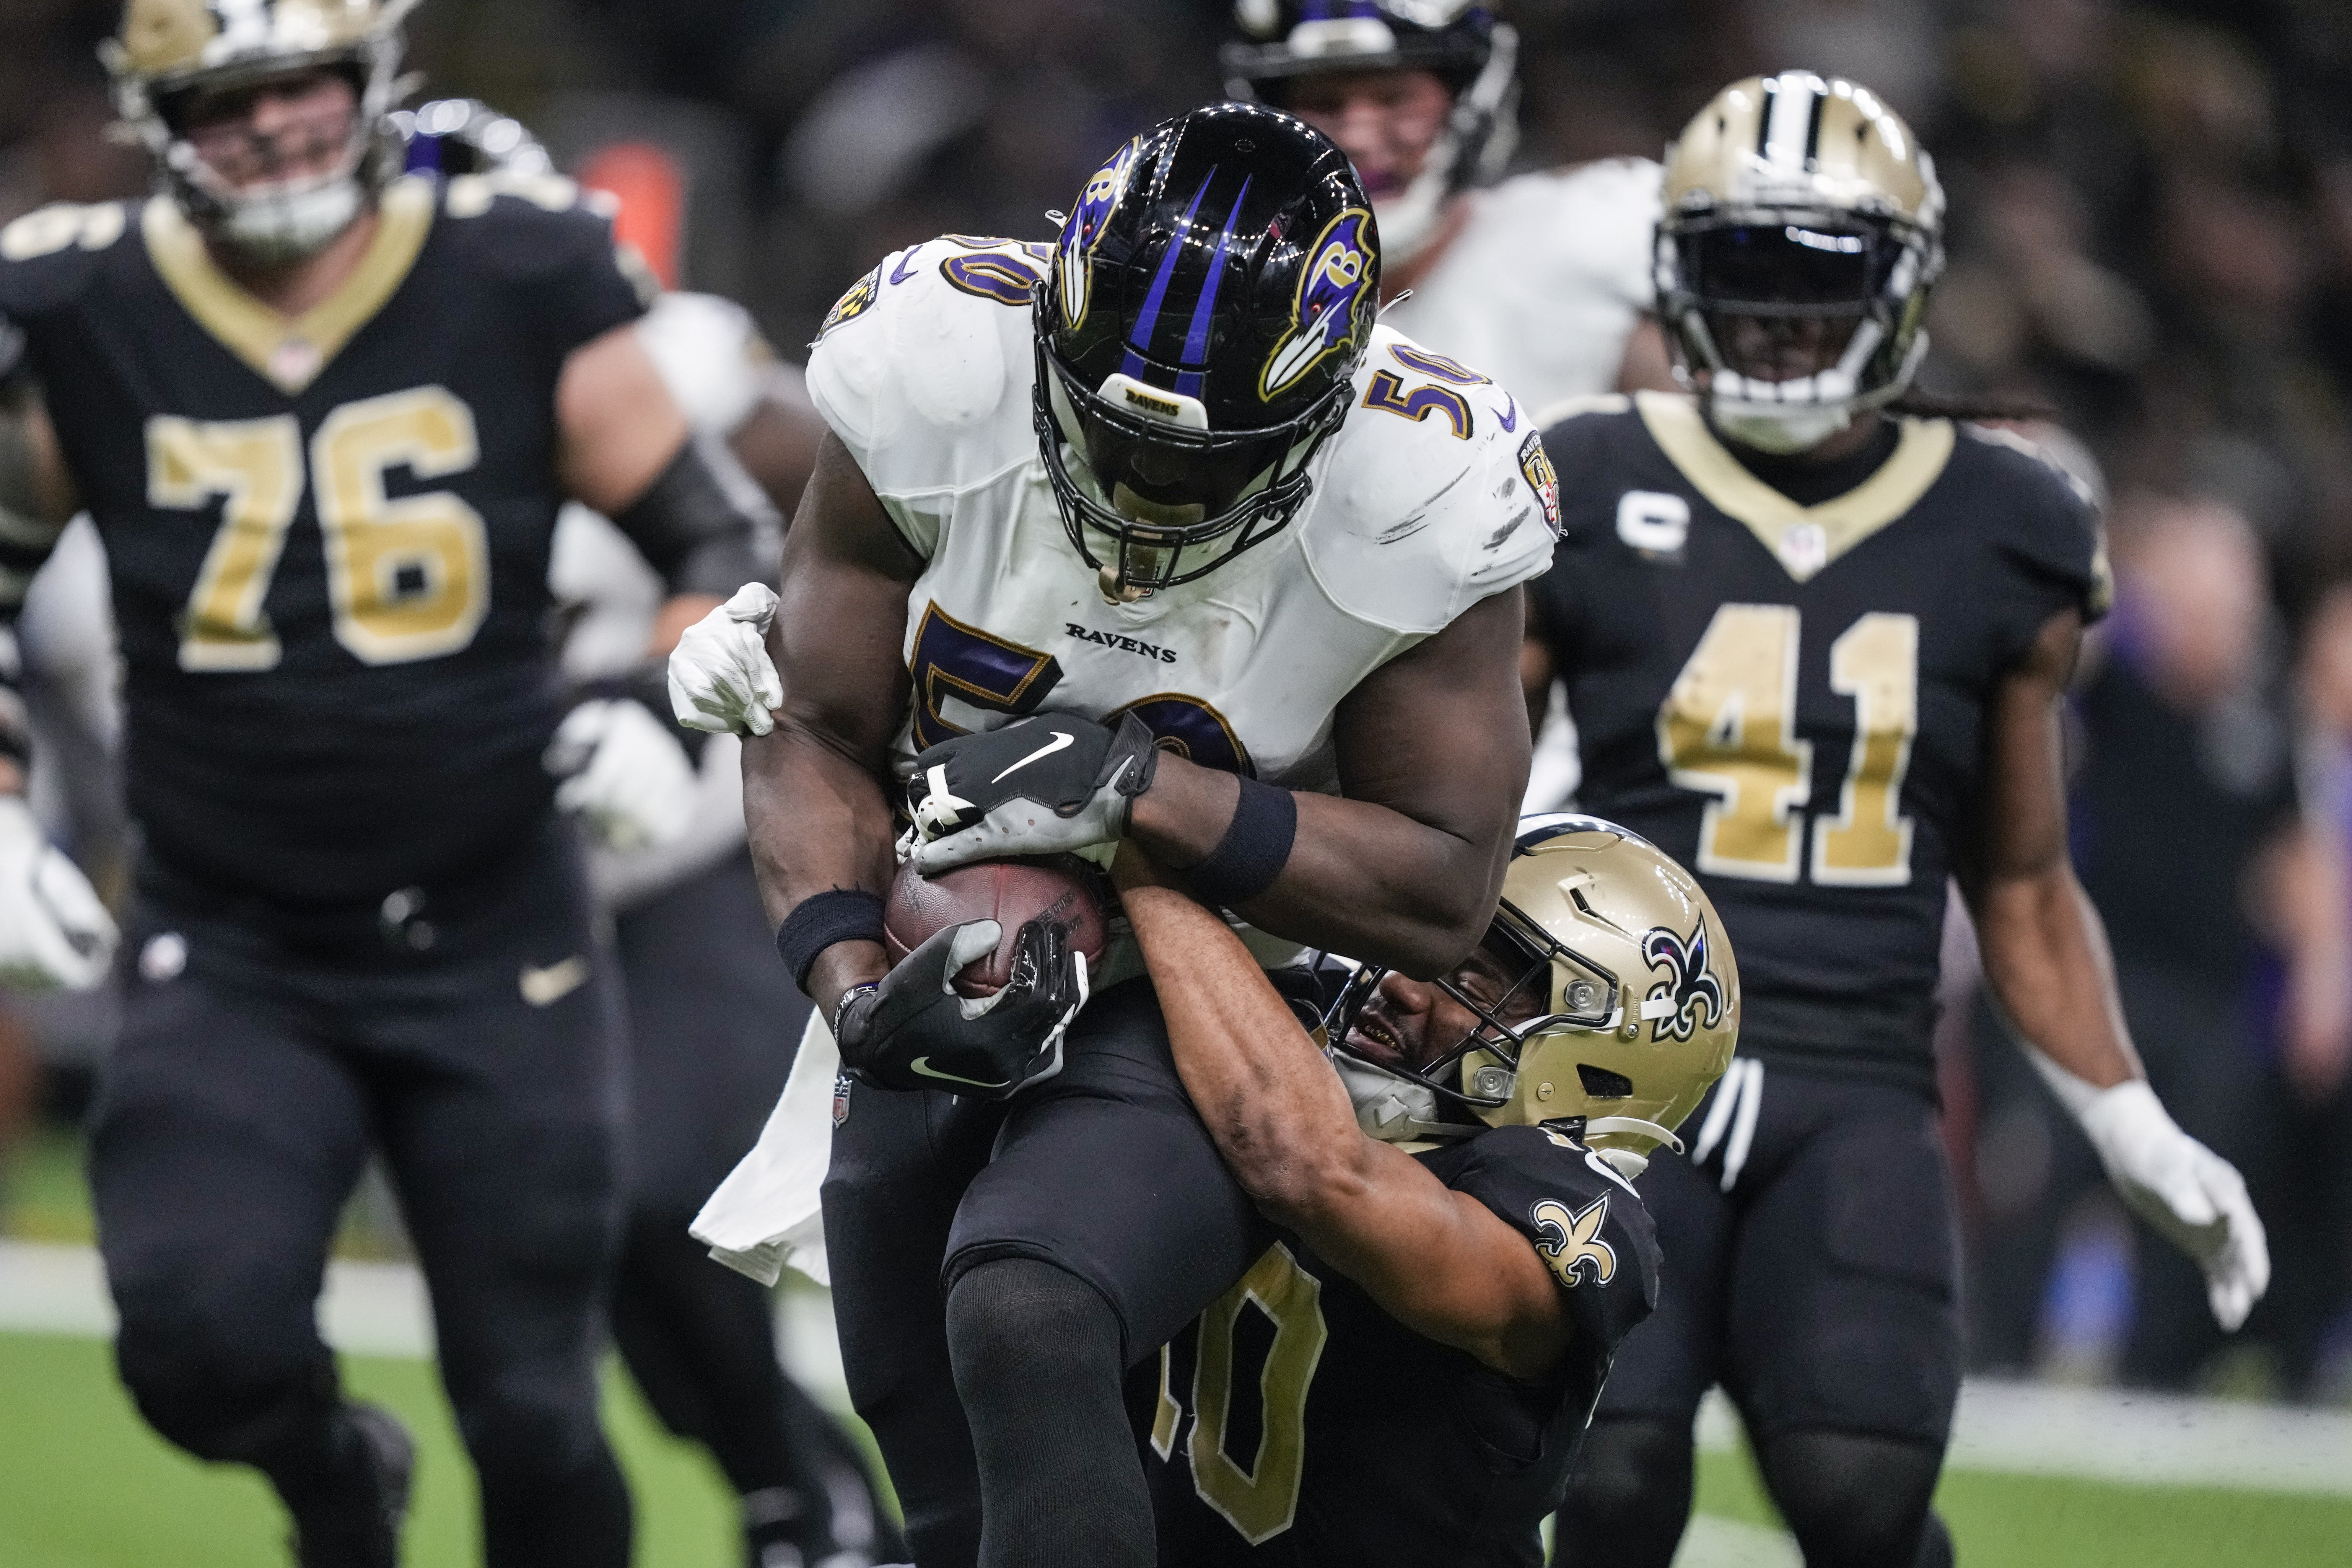 <p><strong>Ravens 27</strong><br />
<strong>Saints 13</strong></p>
<p>Lamar loves Mondays.</p>
<p>Lamar Jackson’s 100th career touchdown pass upped his Monday Night Football ledger to 13 touchdowns and no interceptions in five games. However, the Ravens&#8217; first game of the season outscoring the opposition in the fourth quarter was thanks to the defense. If Roquan Smith’s presence opens things up for even old man Justin Houston to go off for 2.5 sacks and a pick, just wait till David Ojabo gets in the mix.</p>
<p>The Ravens are gonna be scary good coming out of their bye week.</p>
